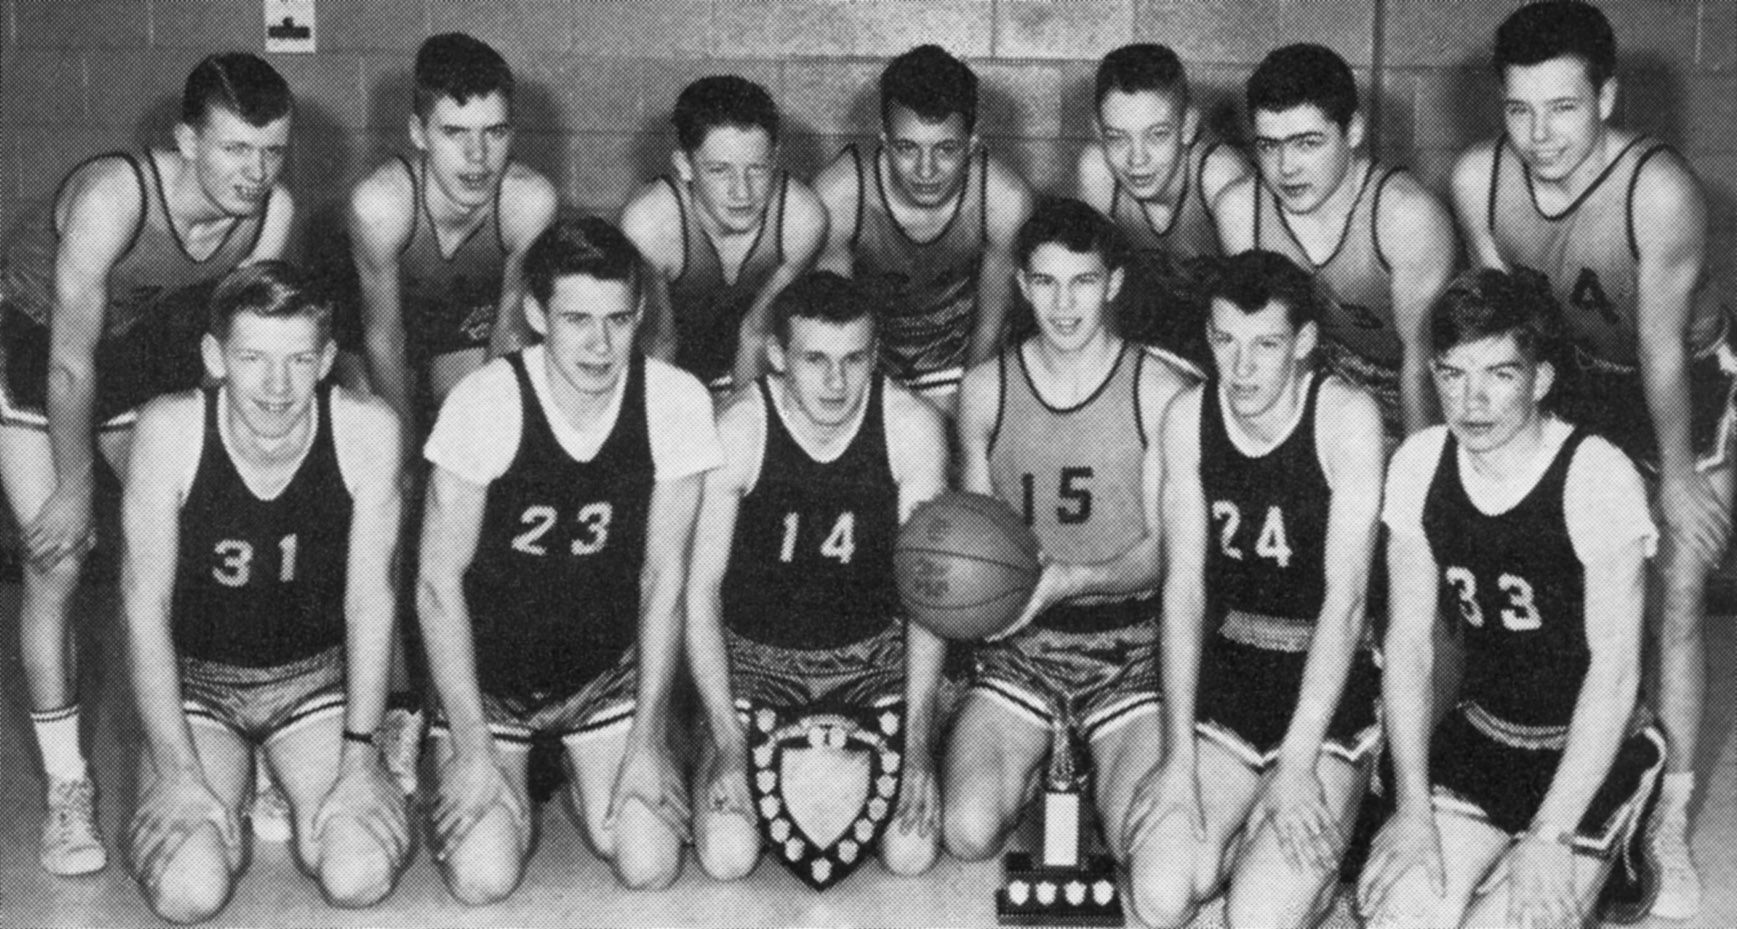 (Click to magnify) FRONT: Bruce Gillham, Paul Barton, Dave Maxwell, Jim Munro, Brian Myers, Keith McFarlane; SECOND ROW: Rene Morrison, Larry Manley, B. Sanders, B. Waller, T. Arens, Ged Stonehouse, Dave Smith.